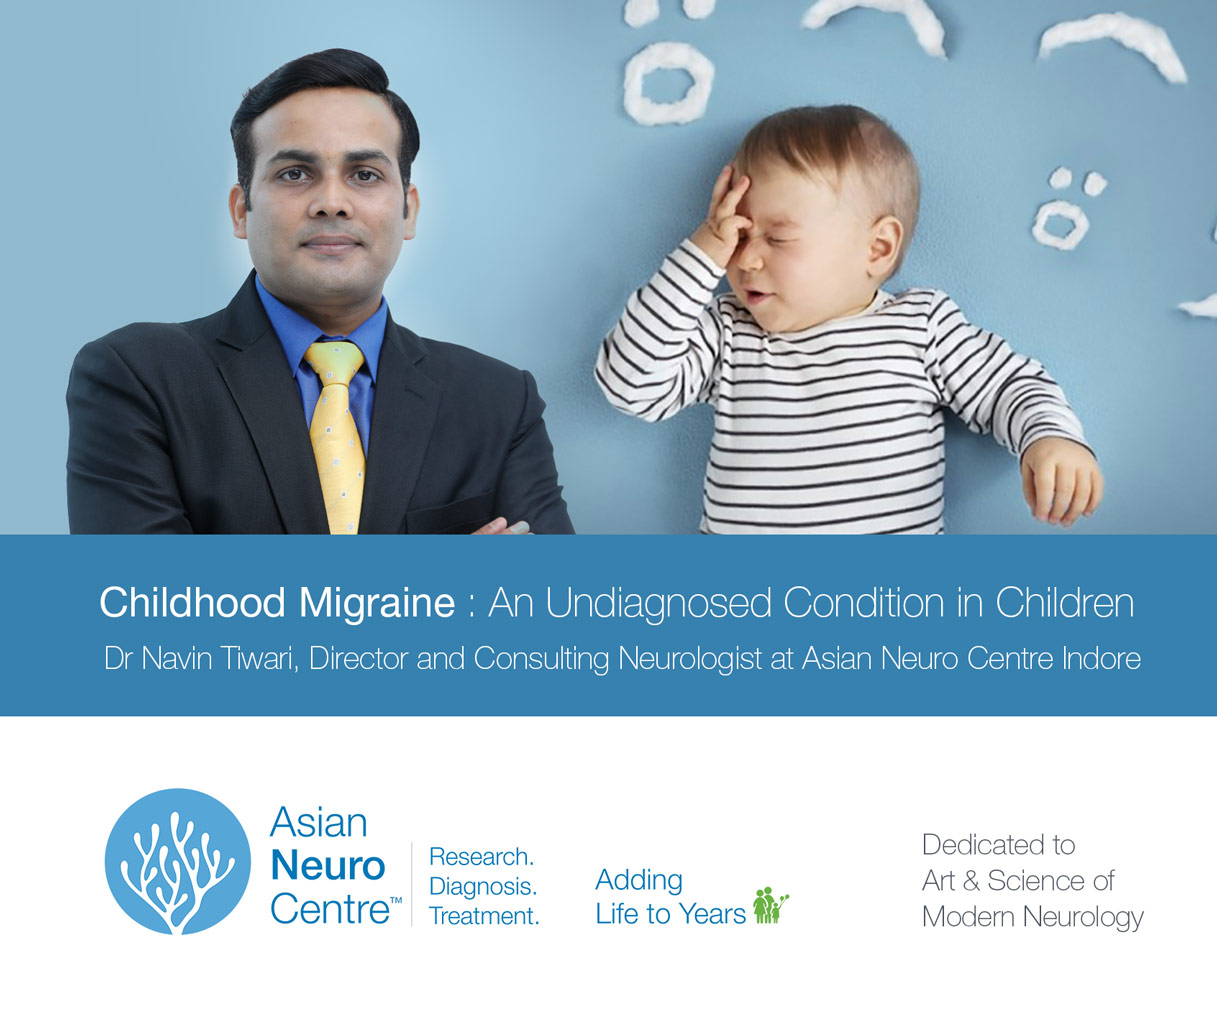 Childhood-Migraine-Treatment-by-Dr-Navin-Tiwari,-Indore